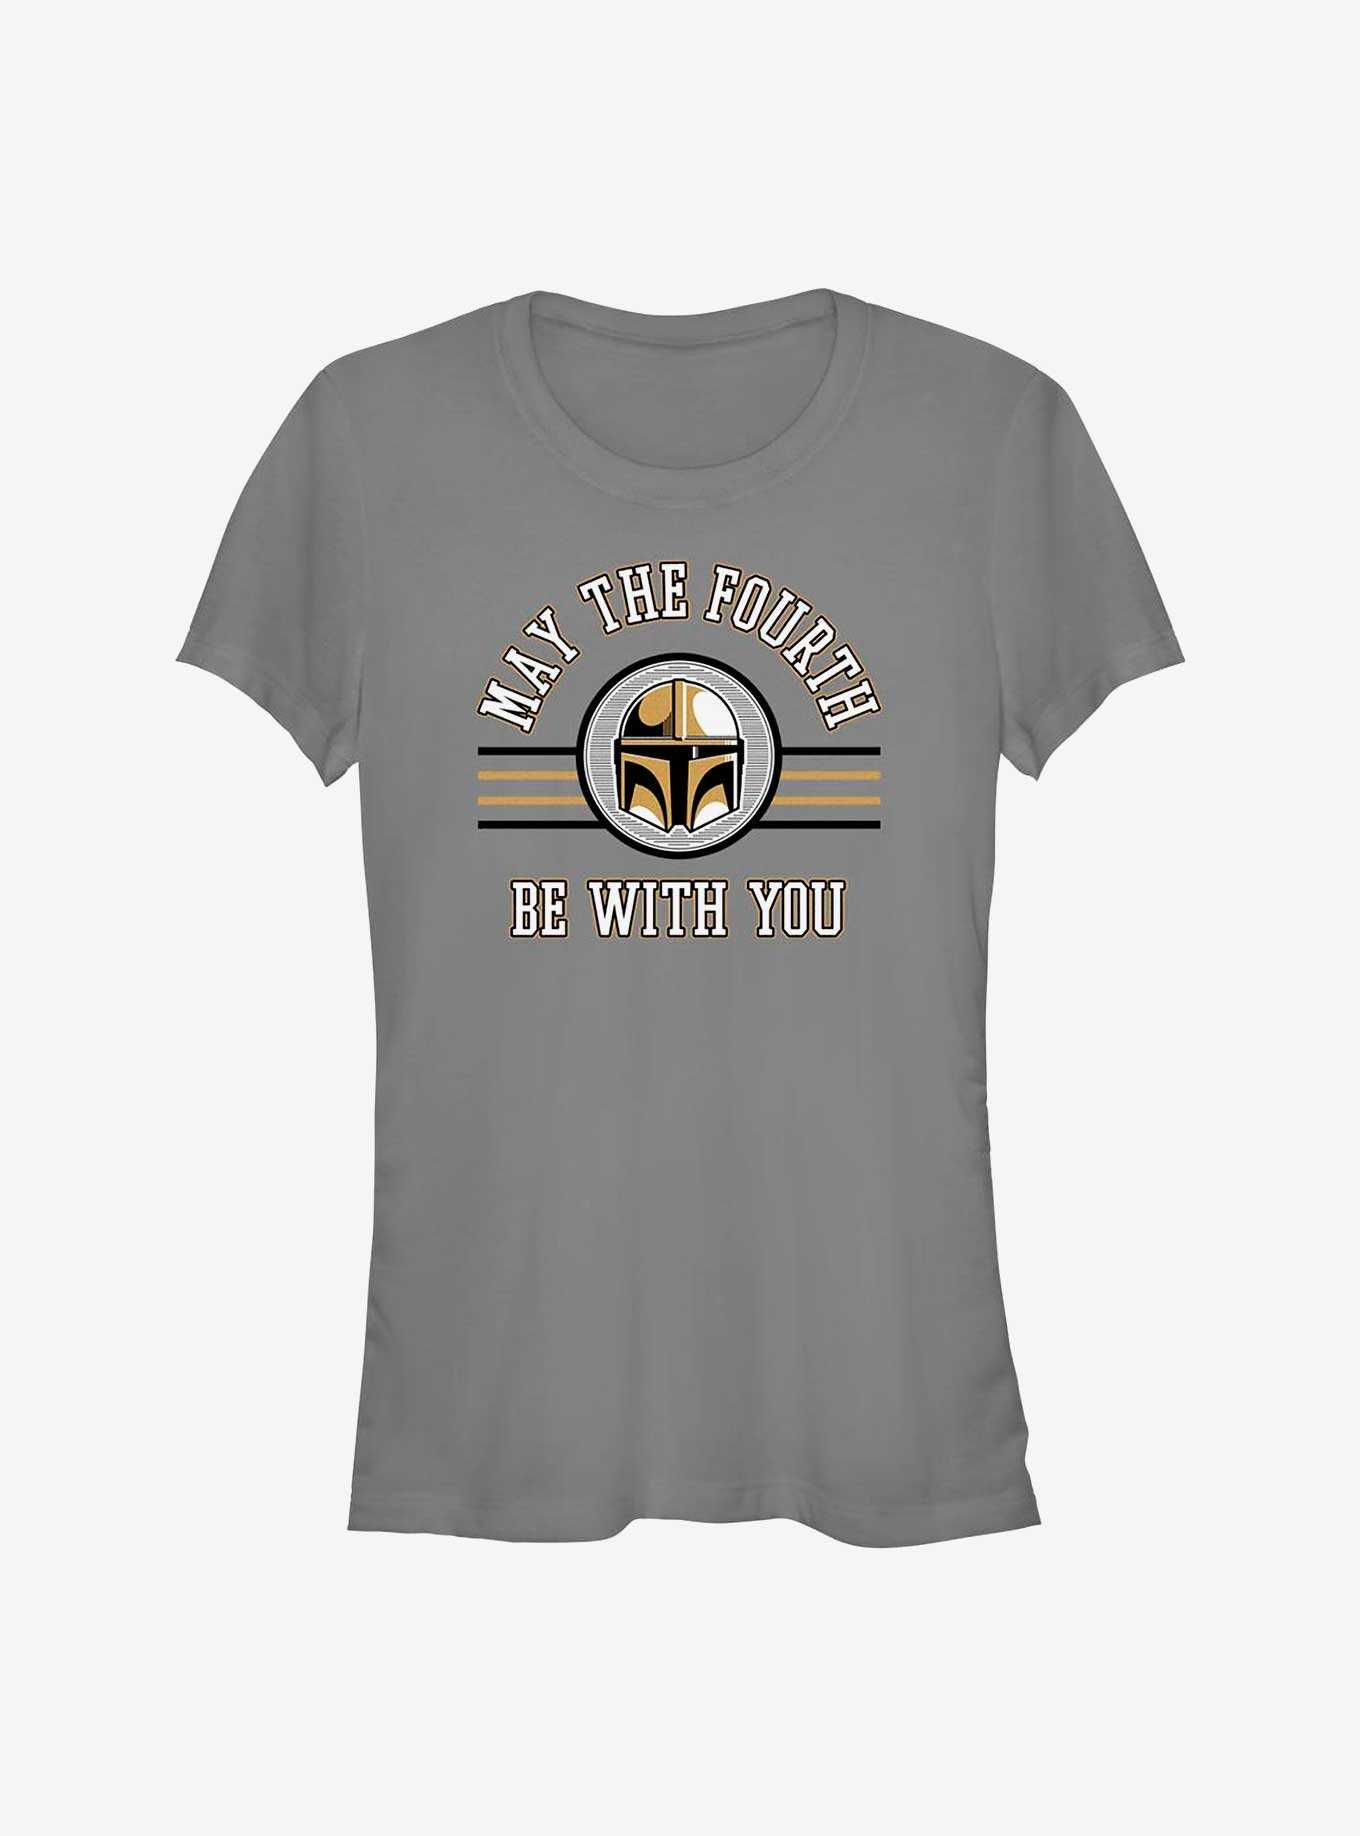 Star Wars The Mandalorian May The Fourth Be With You Girls T-Shirt, , hi-res